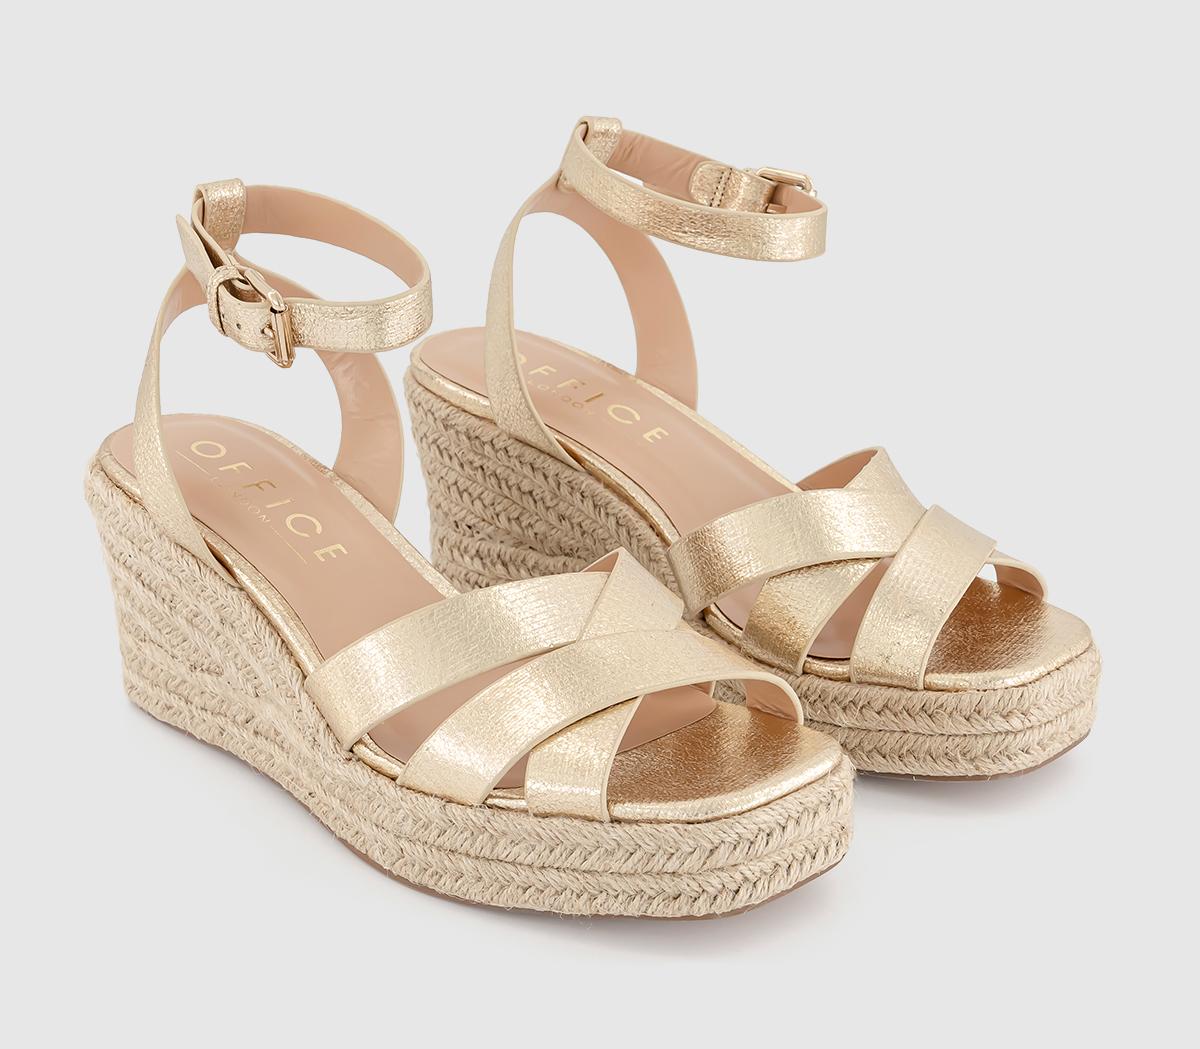 OFFICE Womens Martina Multi Strap Mid Espadrille Wedges Gold, 4